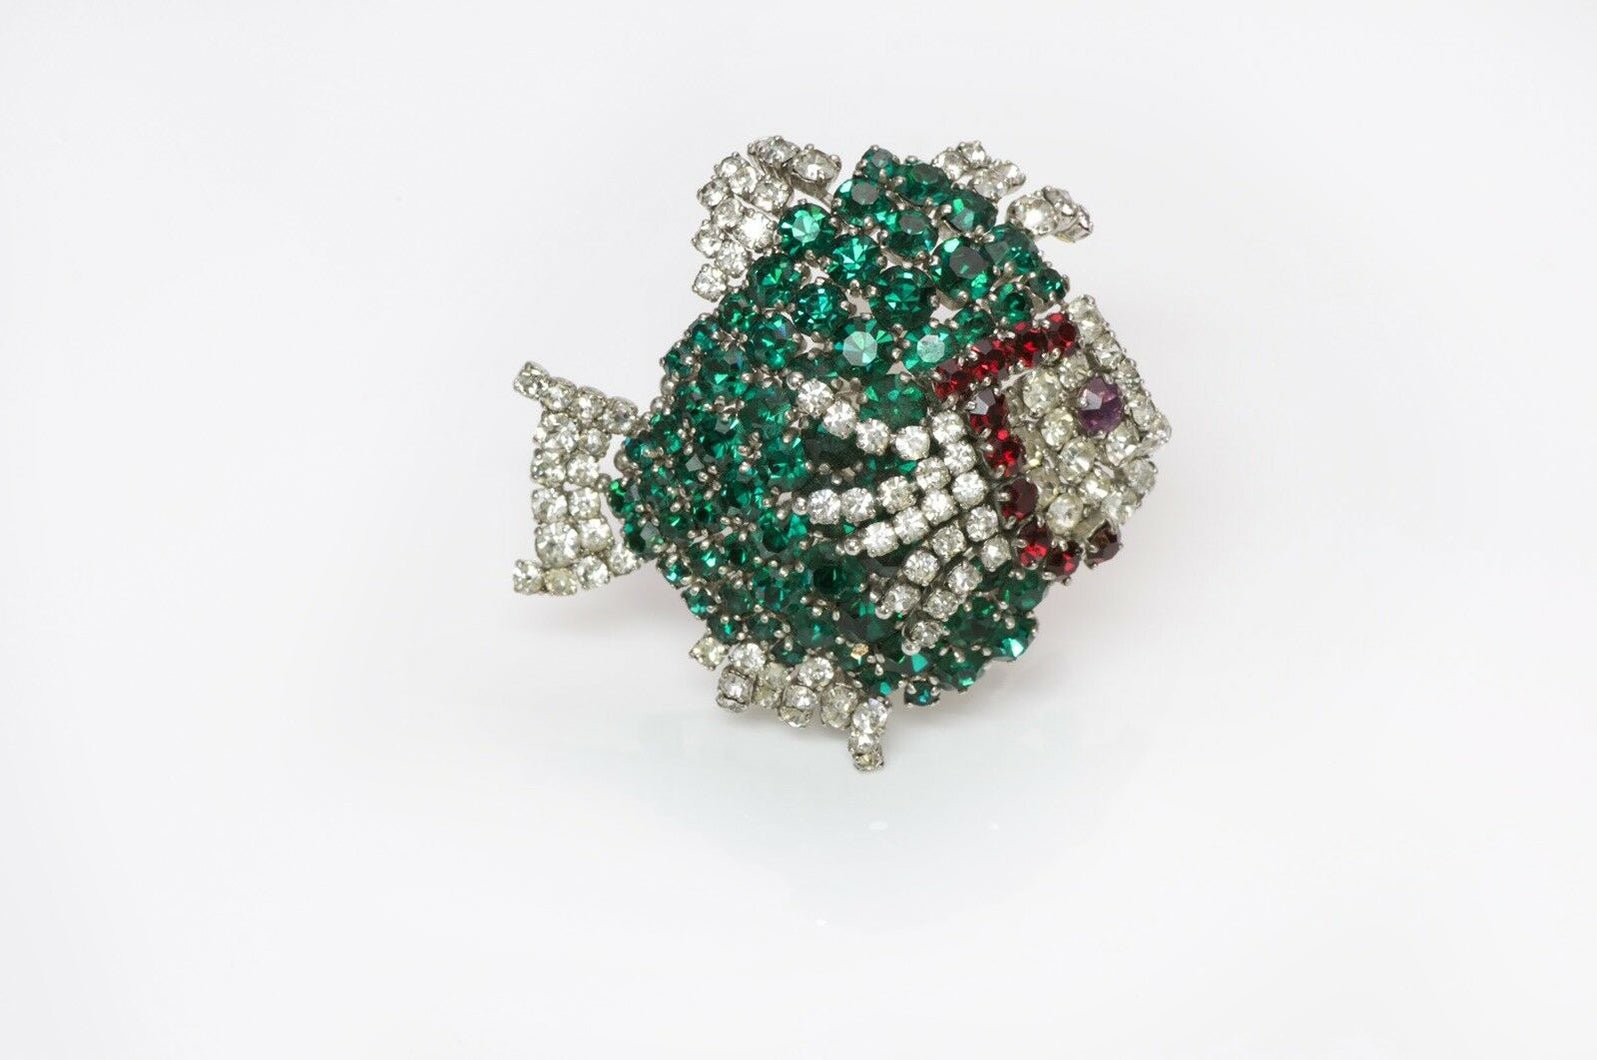 Christian Dior Henkel and Grosse 1961 Green Crystal Fish Brooch